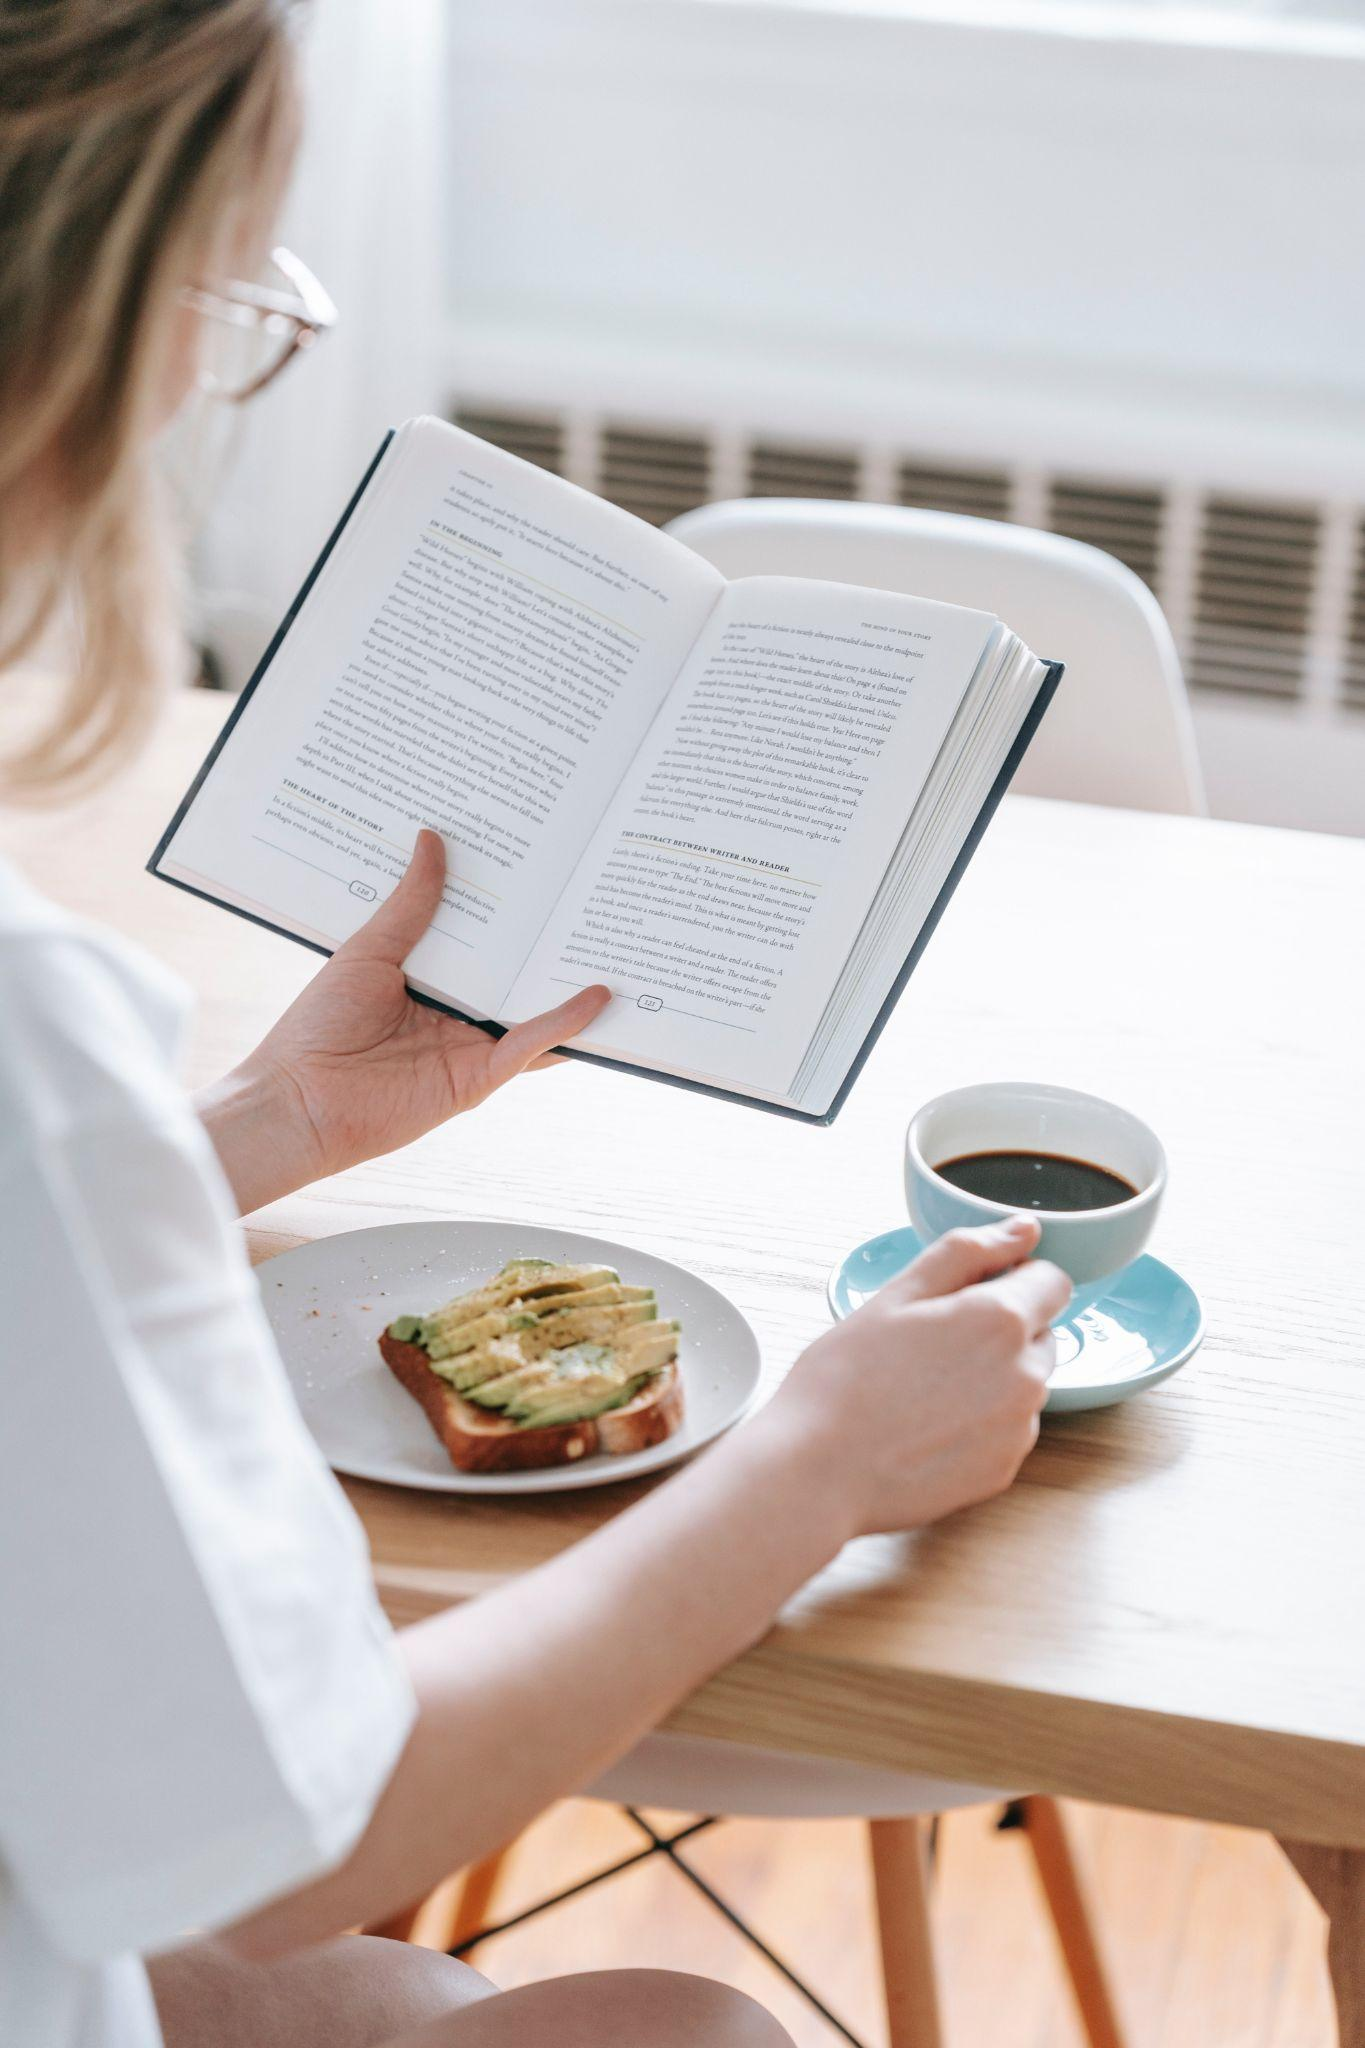 A woman reading a book while having breakfast